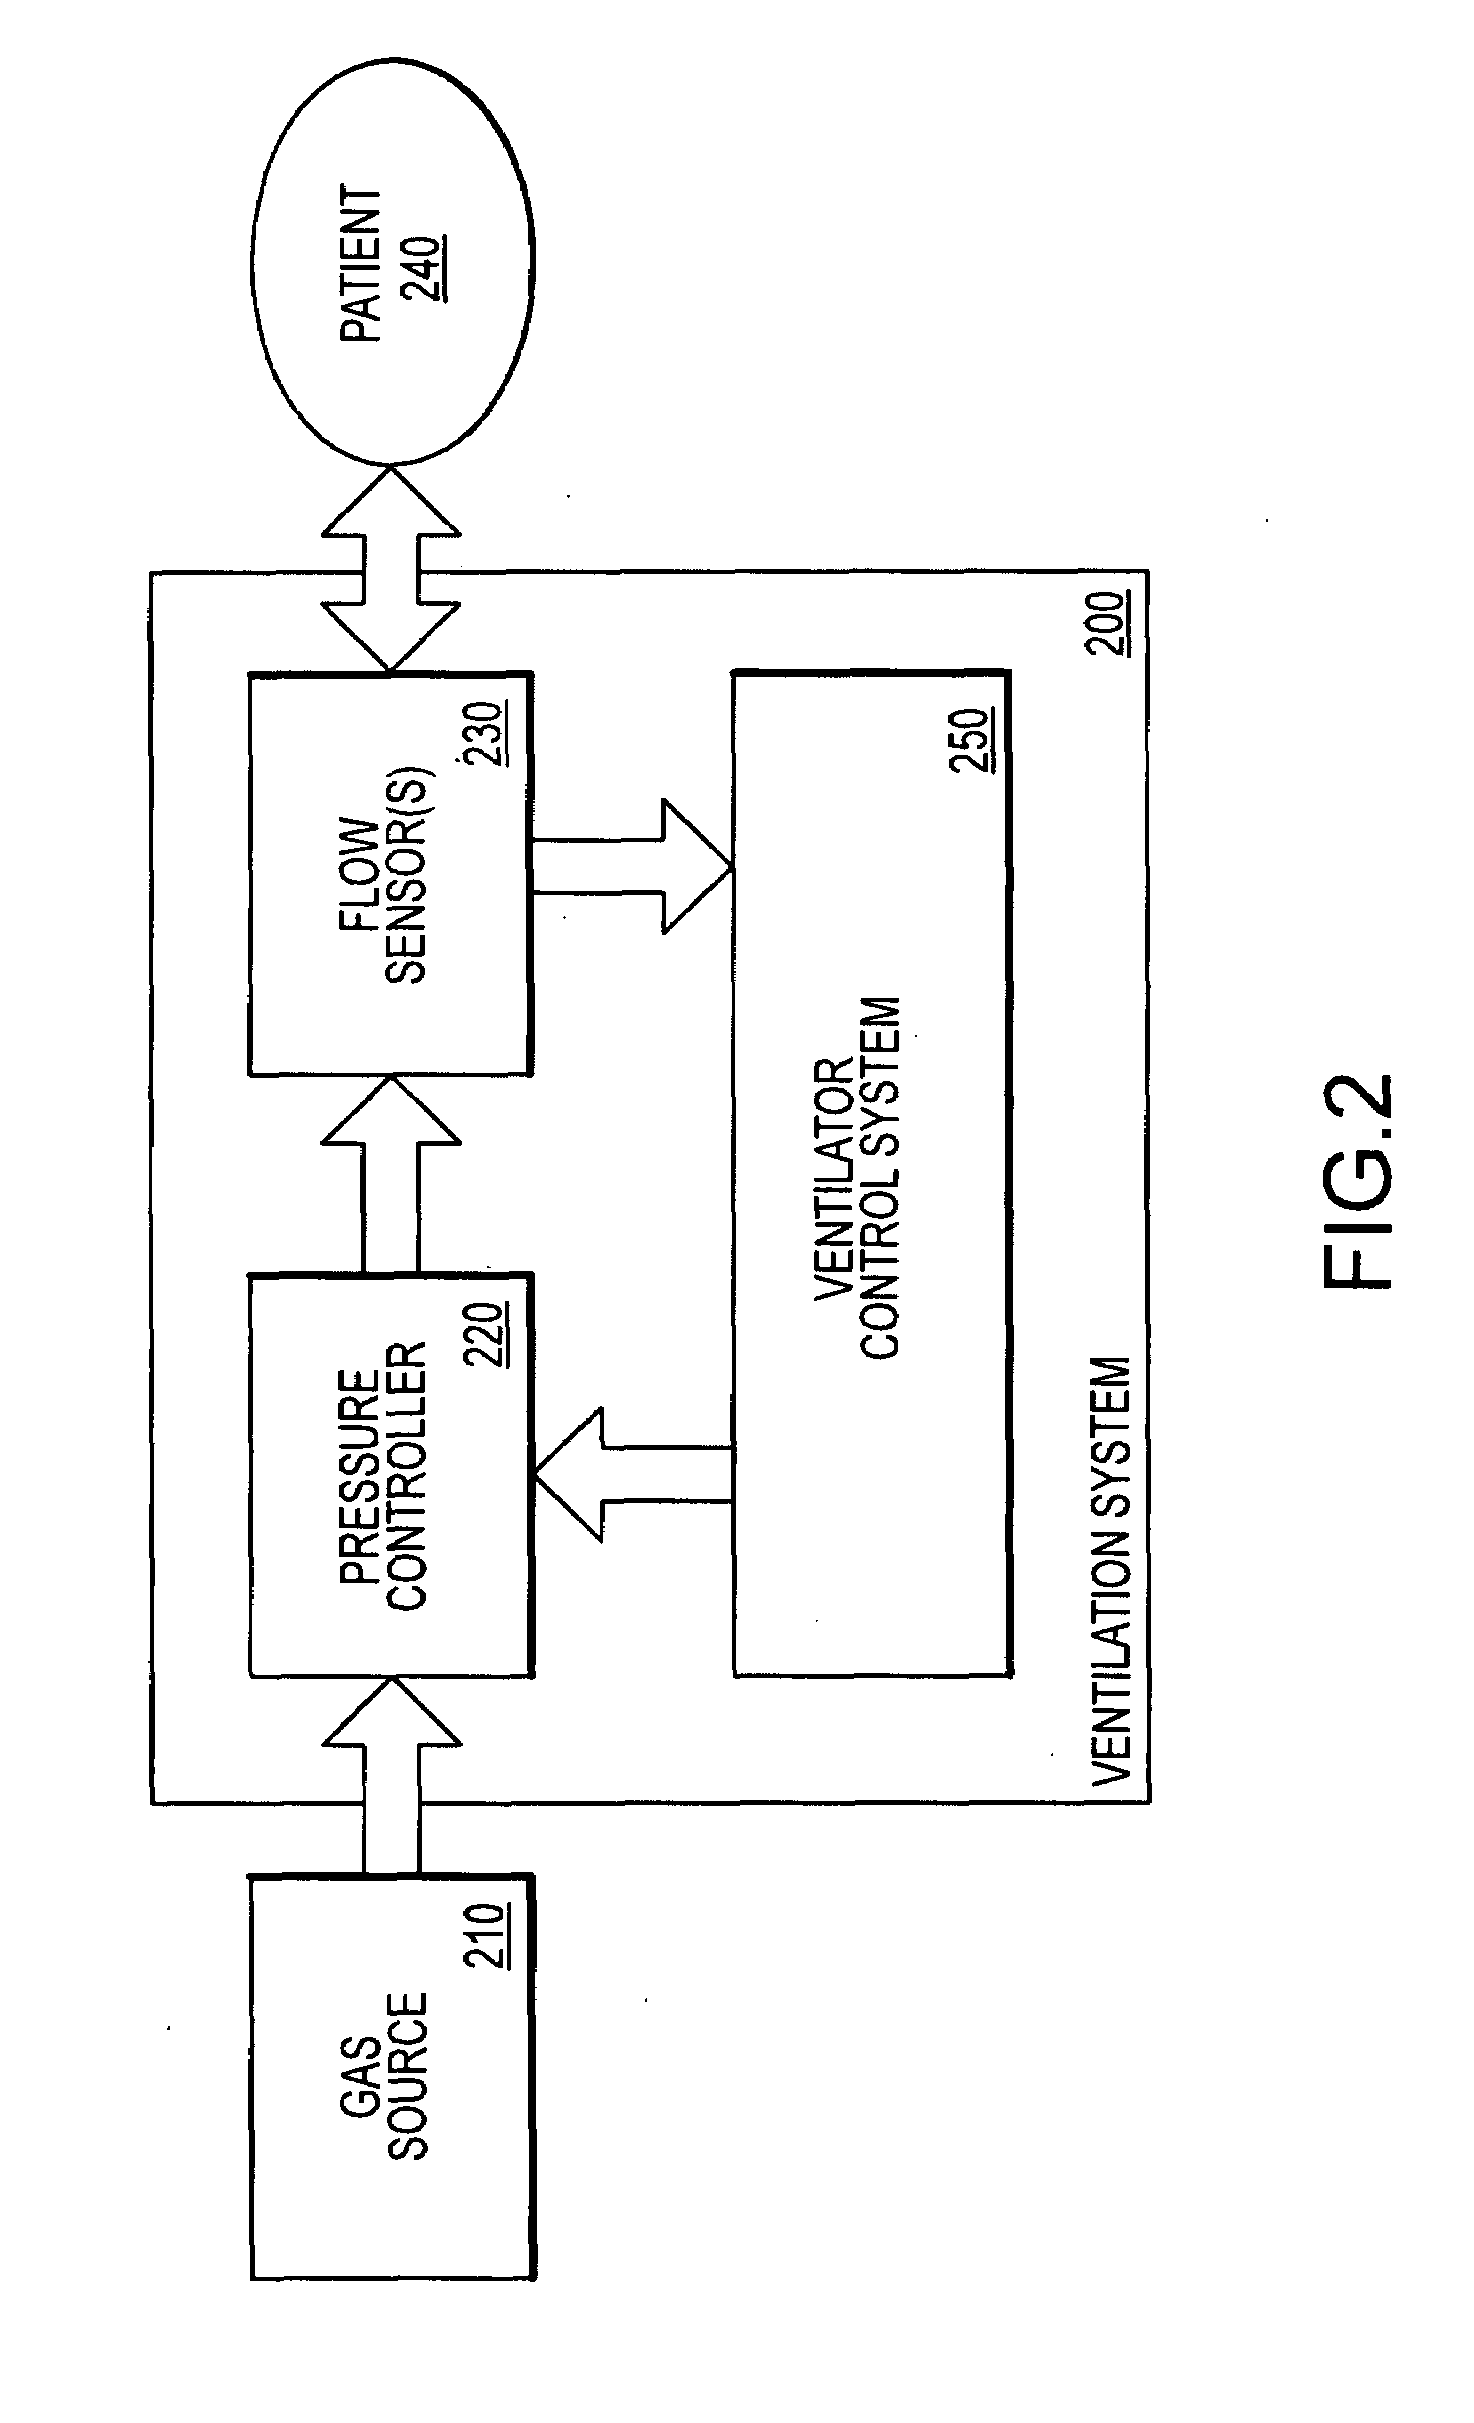 Configuring the operation of an alternating pressure ventilation mode